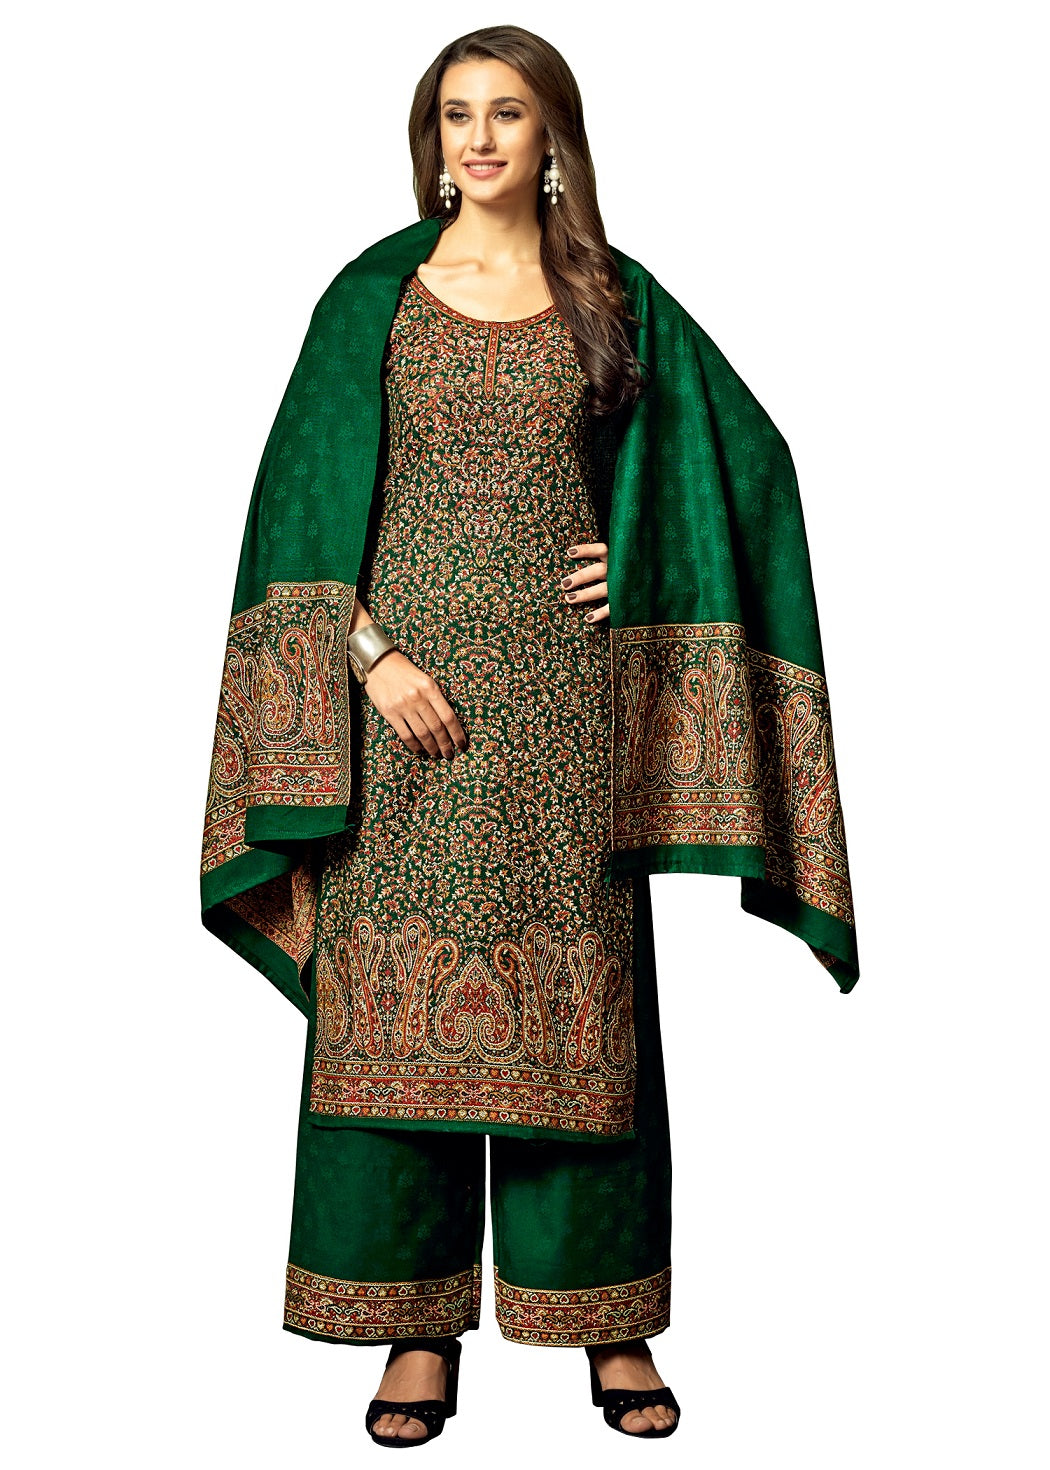 ACRO WOOL GREEN DRESS MATERIAL WITH STOLE